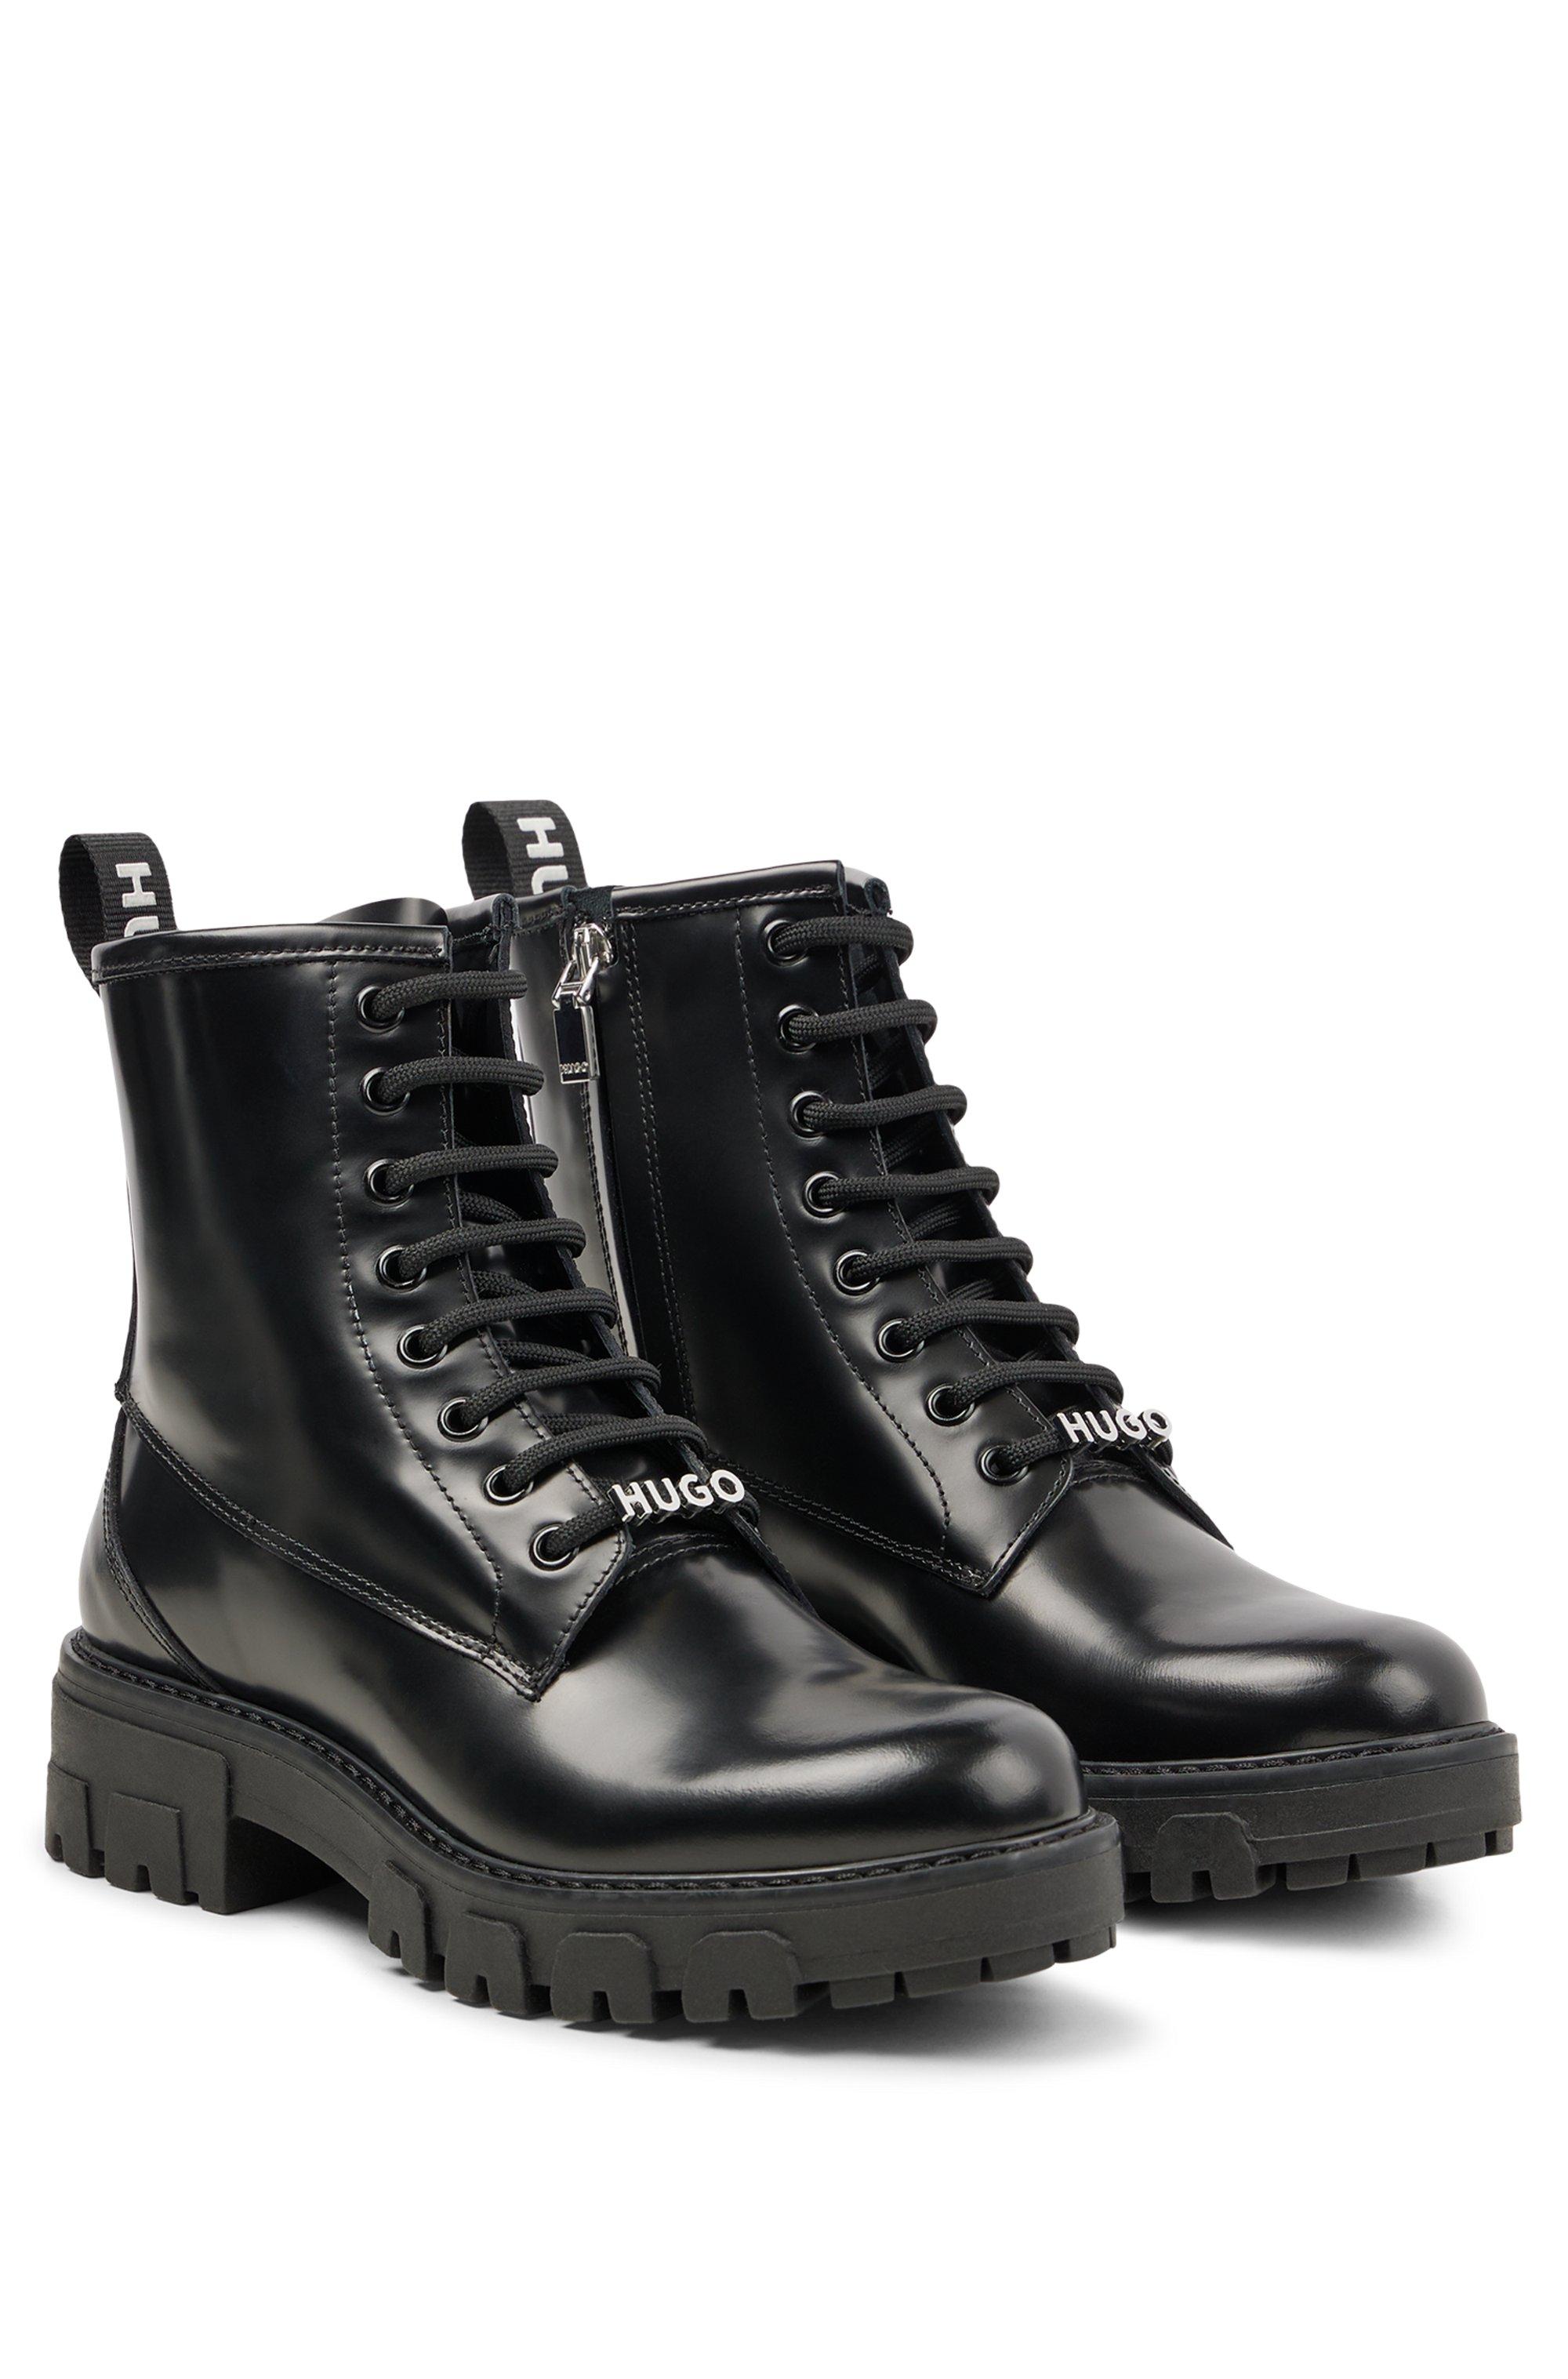 BOSS by HUGO BOSS Ankle Boots In Brush-off Leather in Black | Lyst